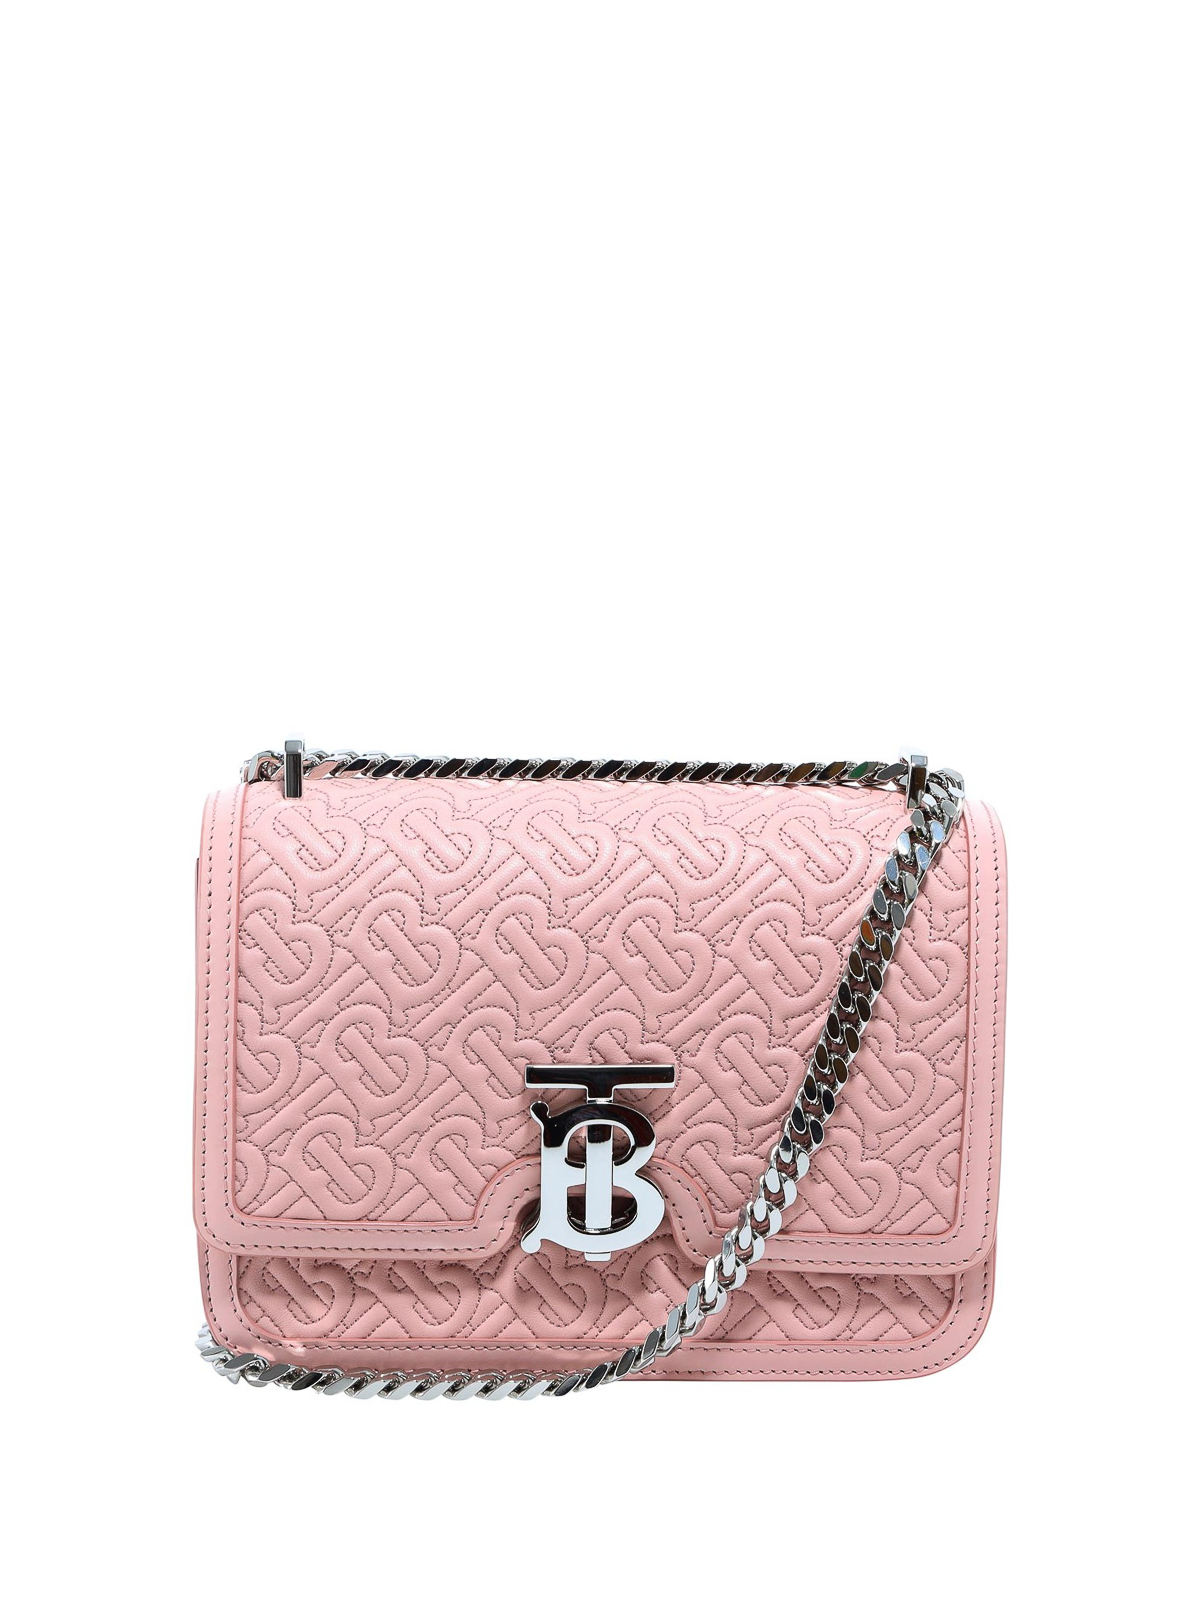 Burberry - TB quilted leather bag - cross body bags - 8027189 | iKRIX.com